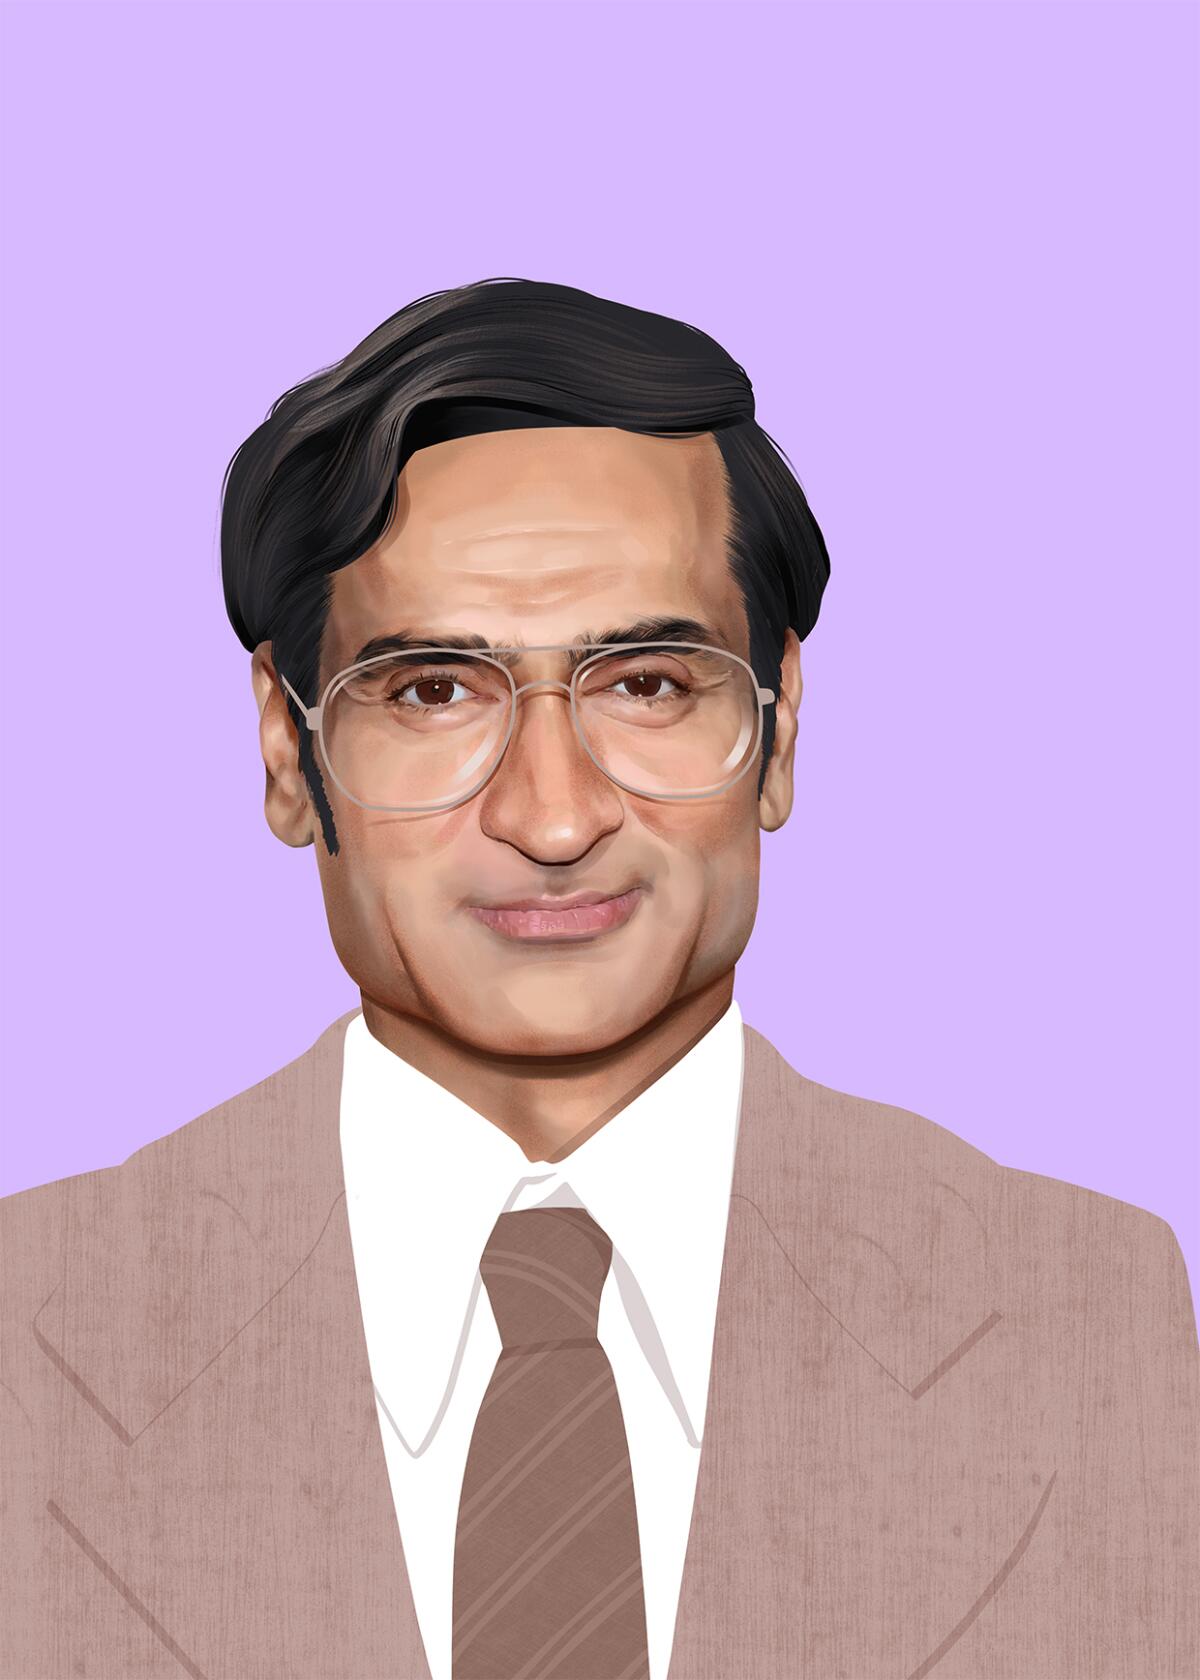 Illustration of Kumail Nanjiani as his "Welcome to Chippendale's" character.